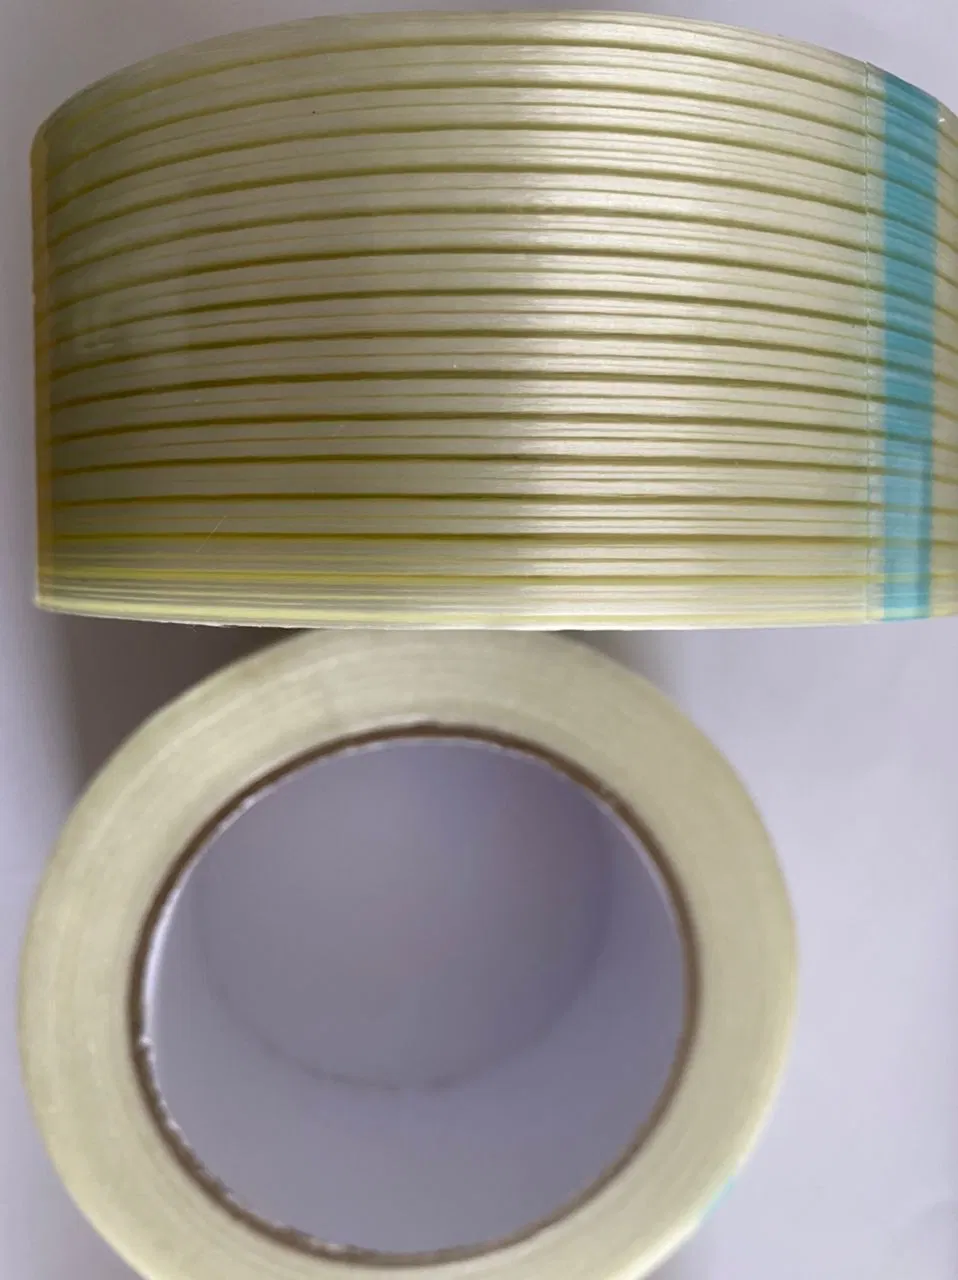 Filament Tape for Binding Packing